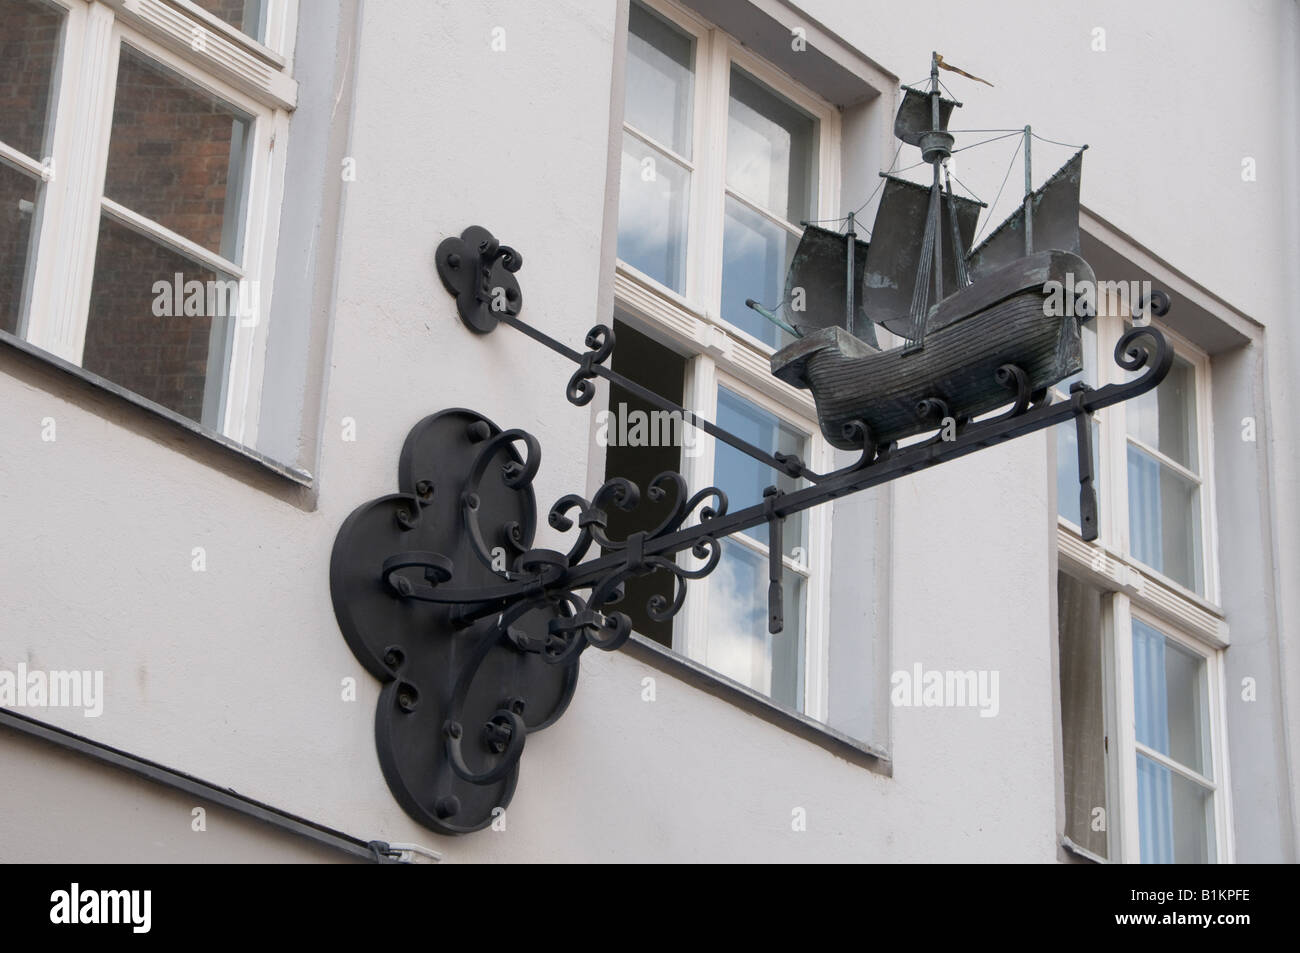 Medieval wrought iron shop sign depicting a caravel in Rathaus area Mitte Quarter Scheunenviertel Berlin Germany Stock Photo